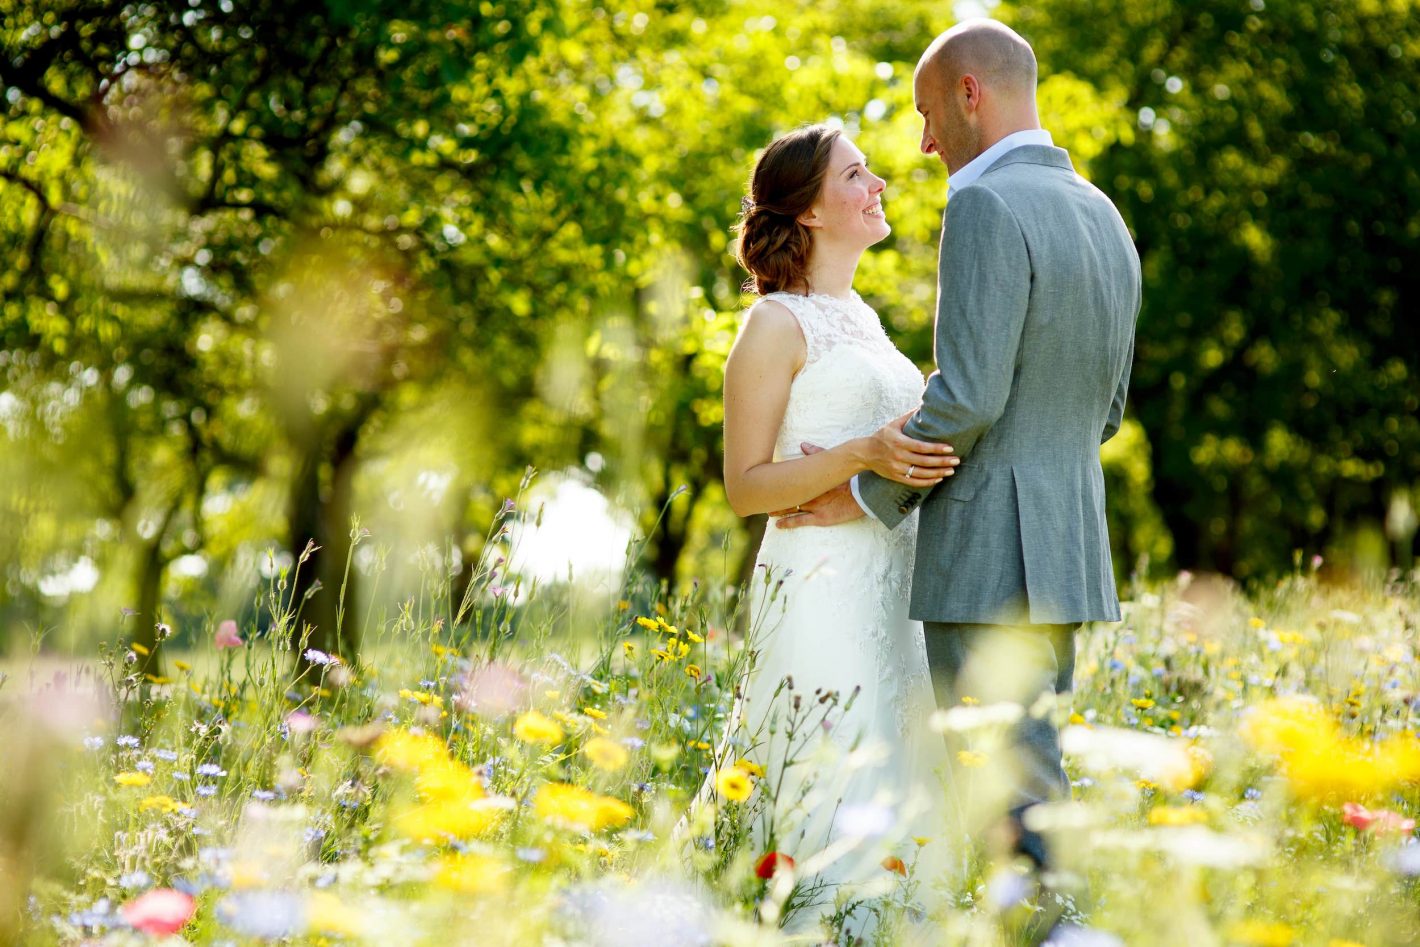 Getting married in the orchard of Marienwaerdt estate